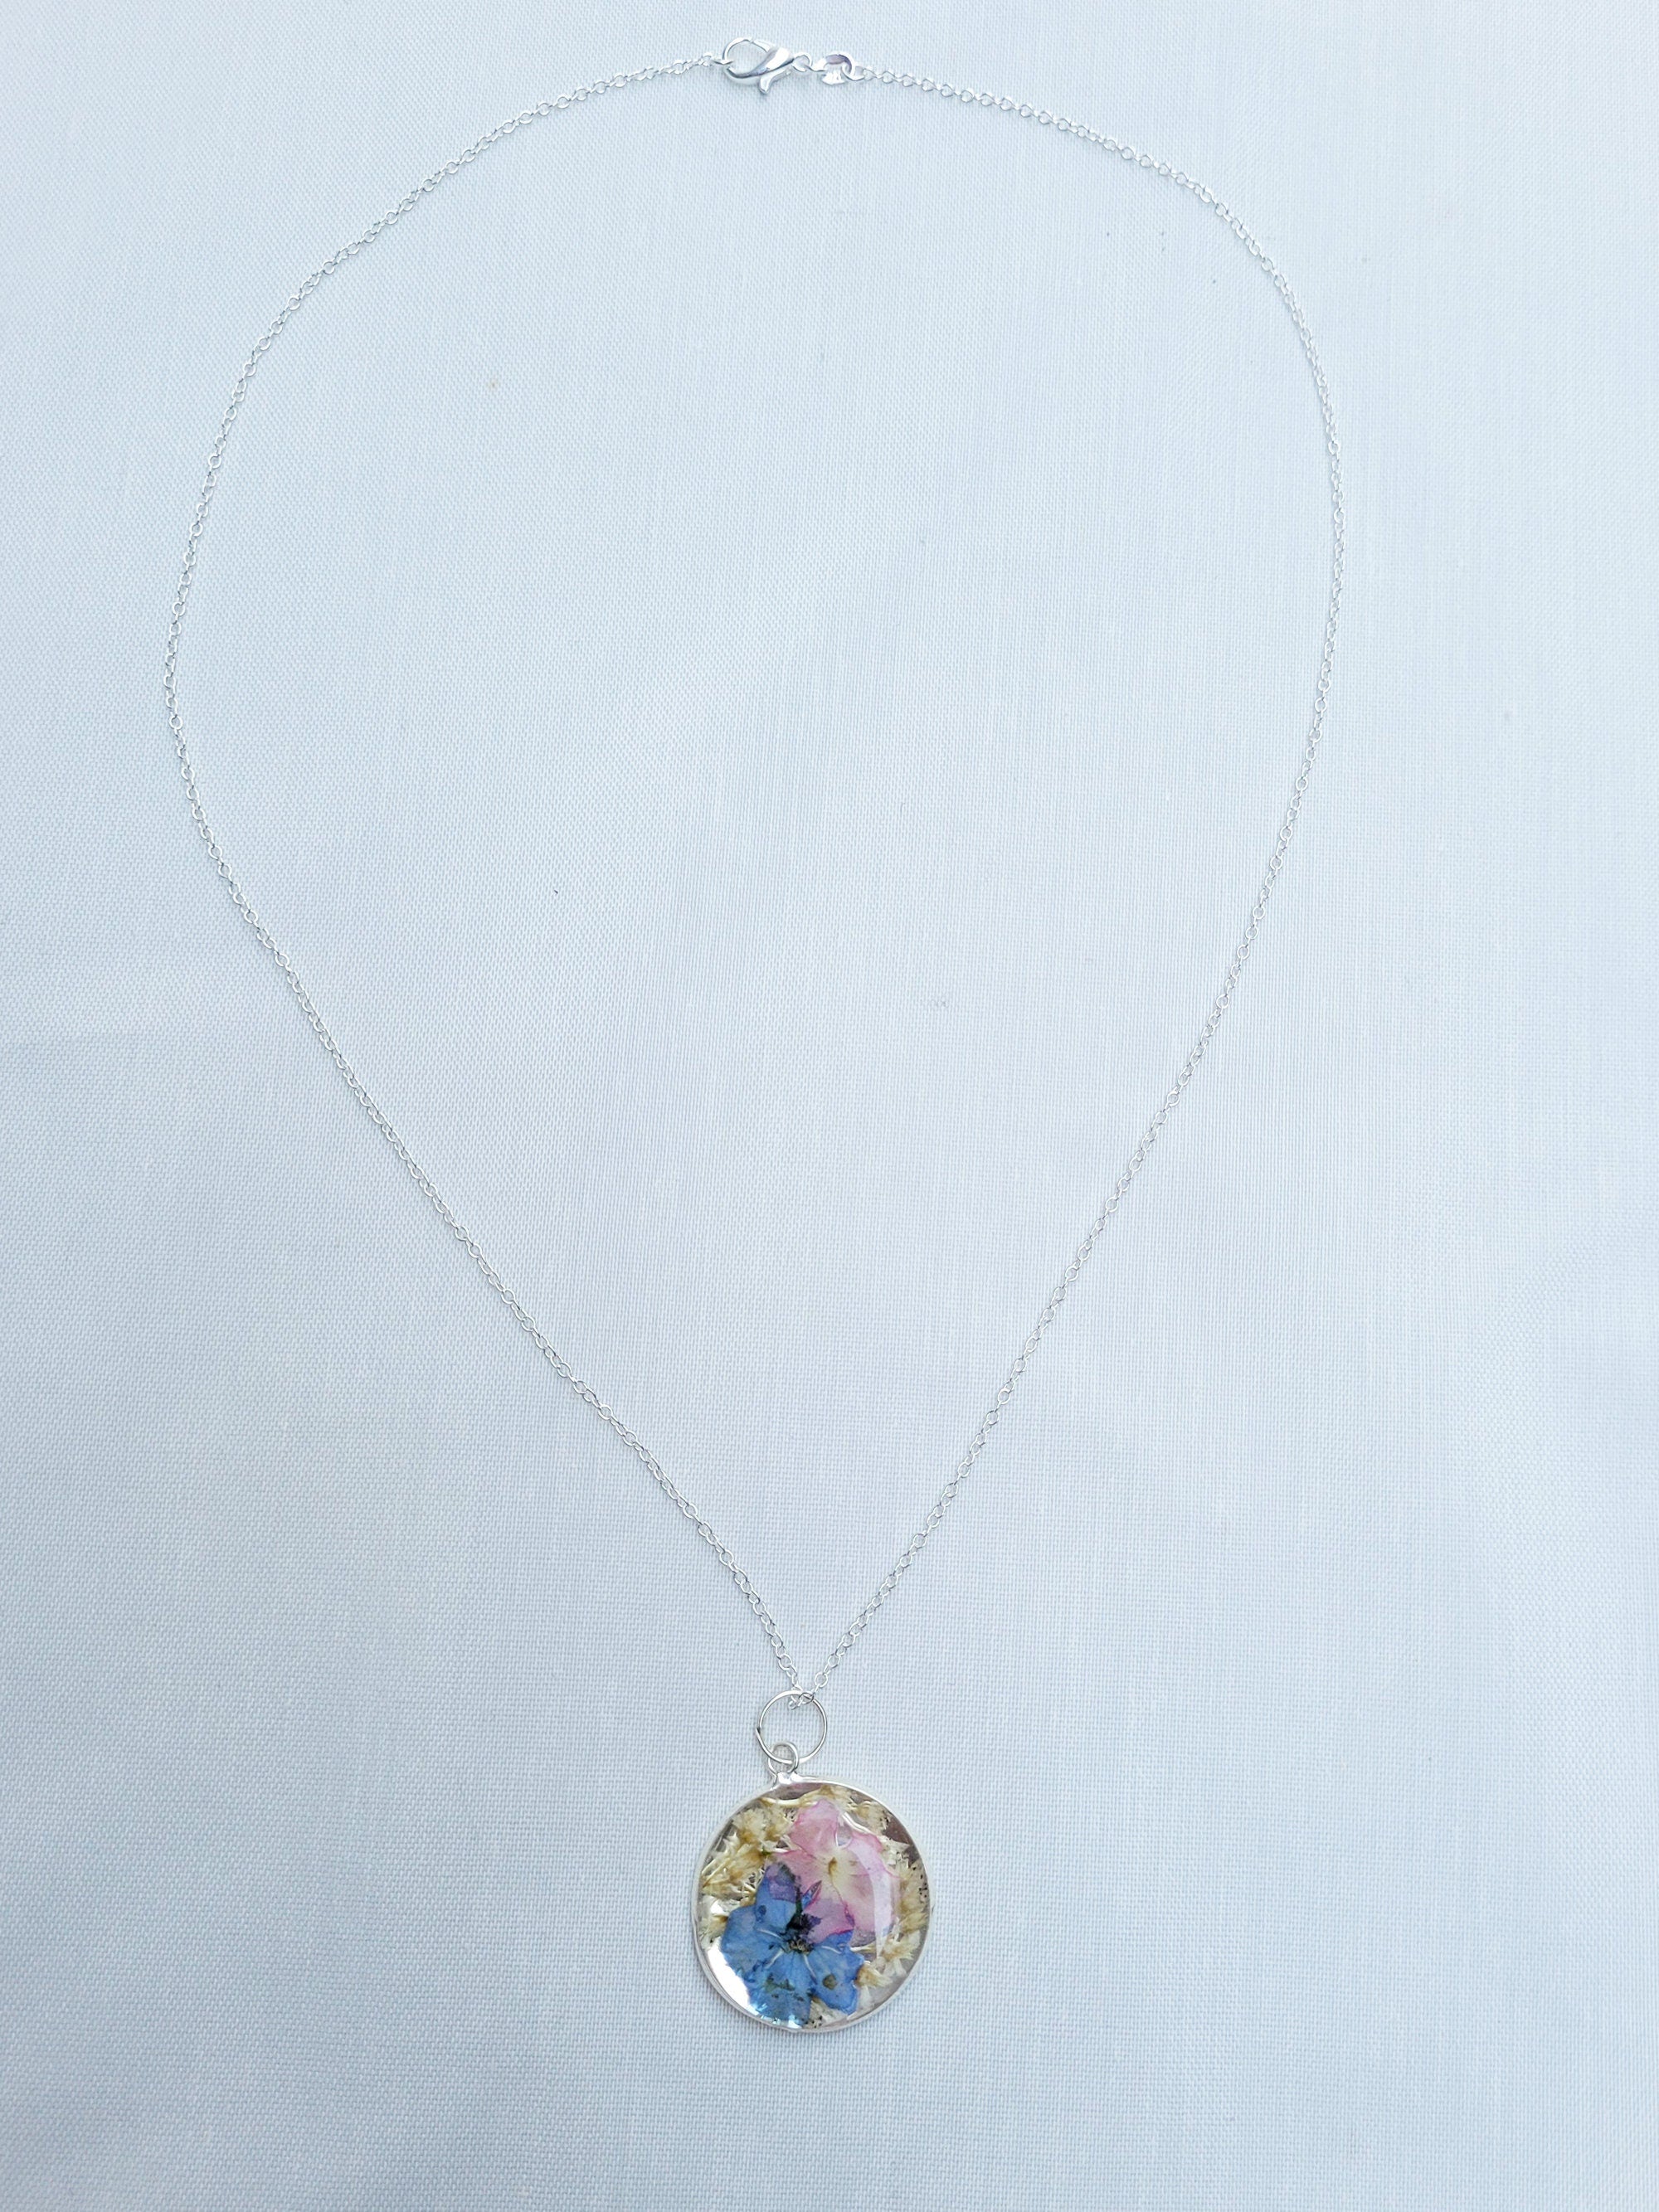 Dried flower resin round pendant necklace with silver chain,   RN3